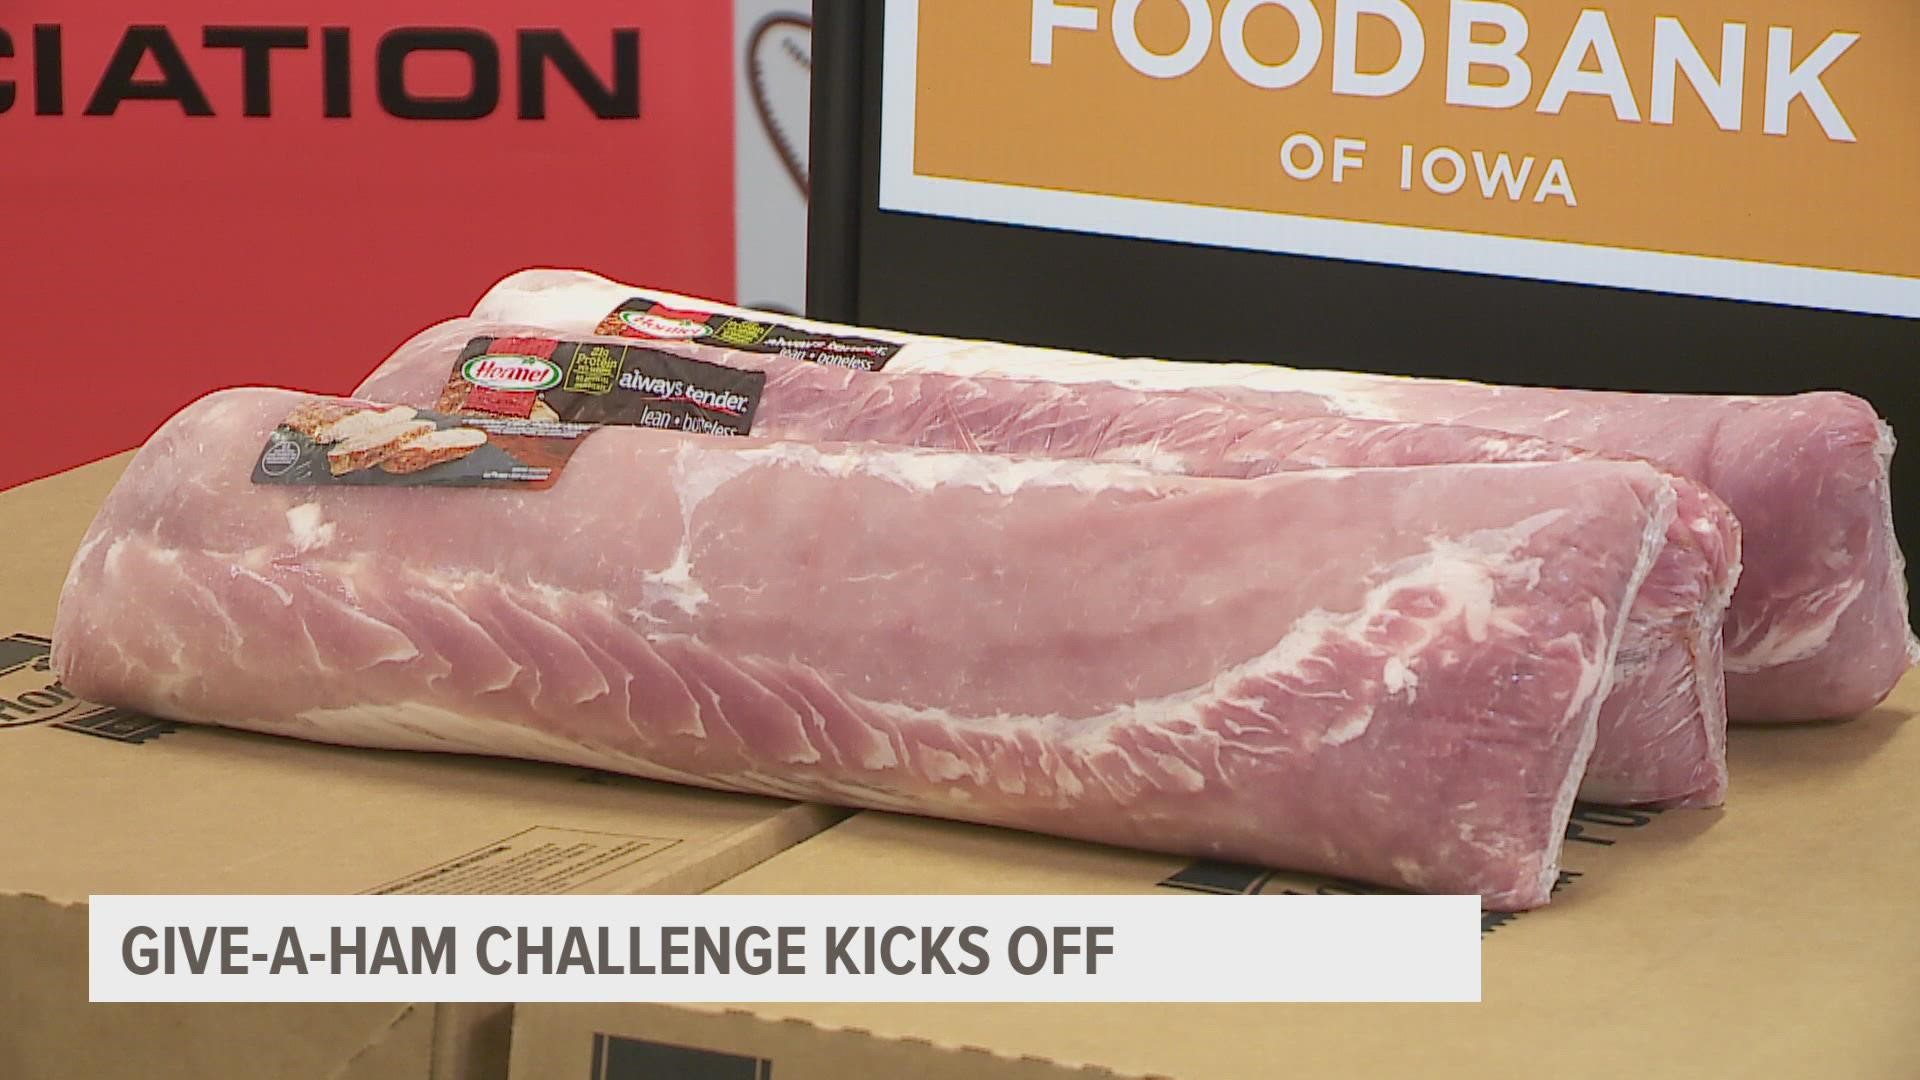 The National Pork Producers is kicking off its annual "give a ham" challenge to encourage folks across the country to donate pork to local food pantries.